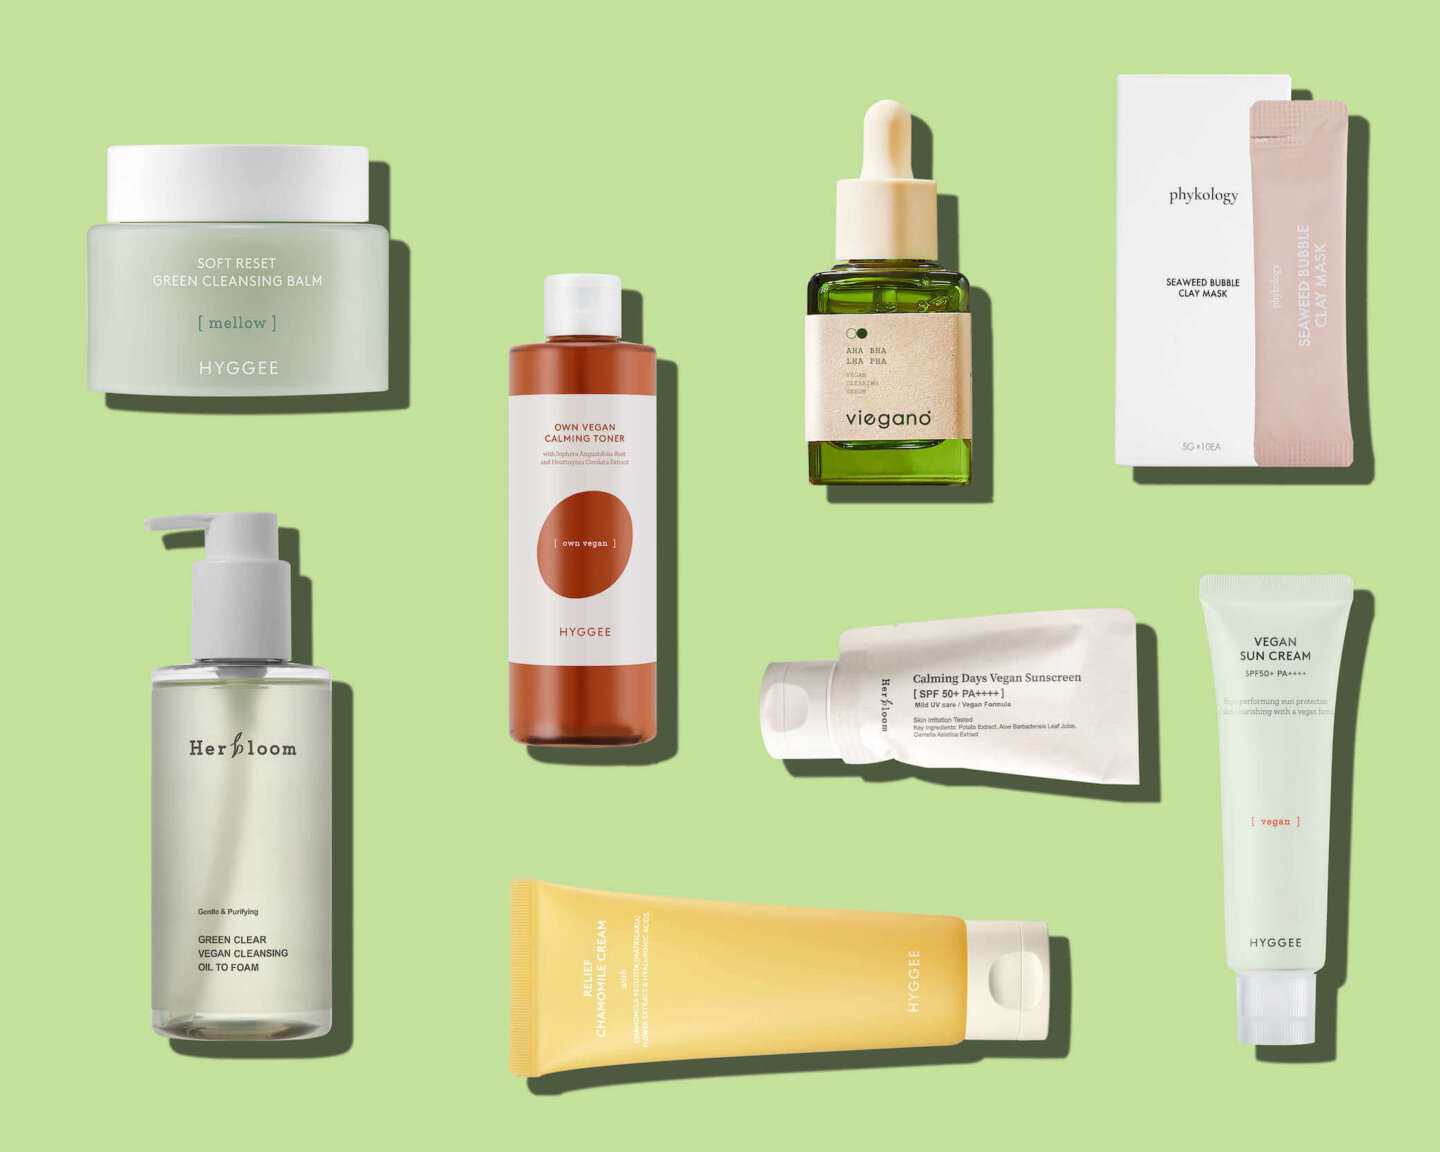 Korean Skincare Routine for Oily Skin product recommendations